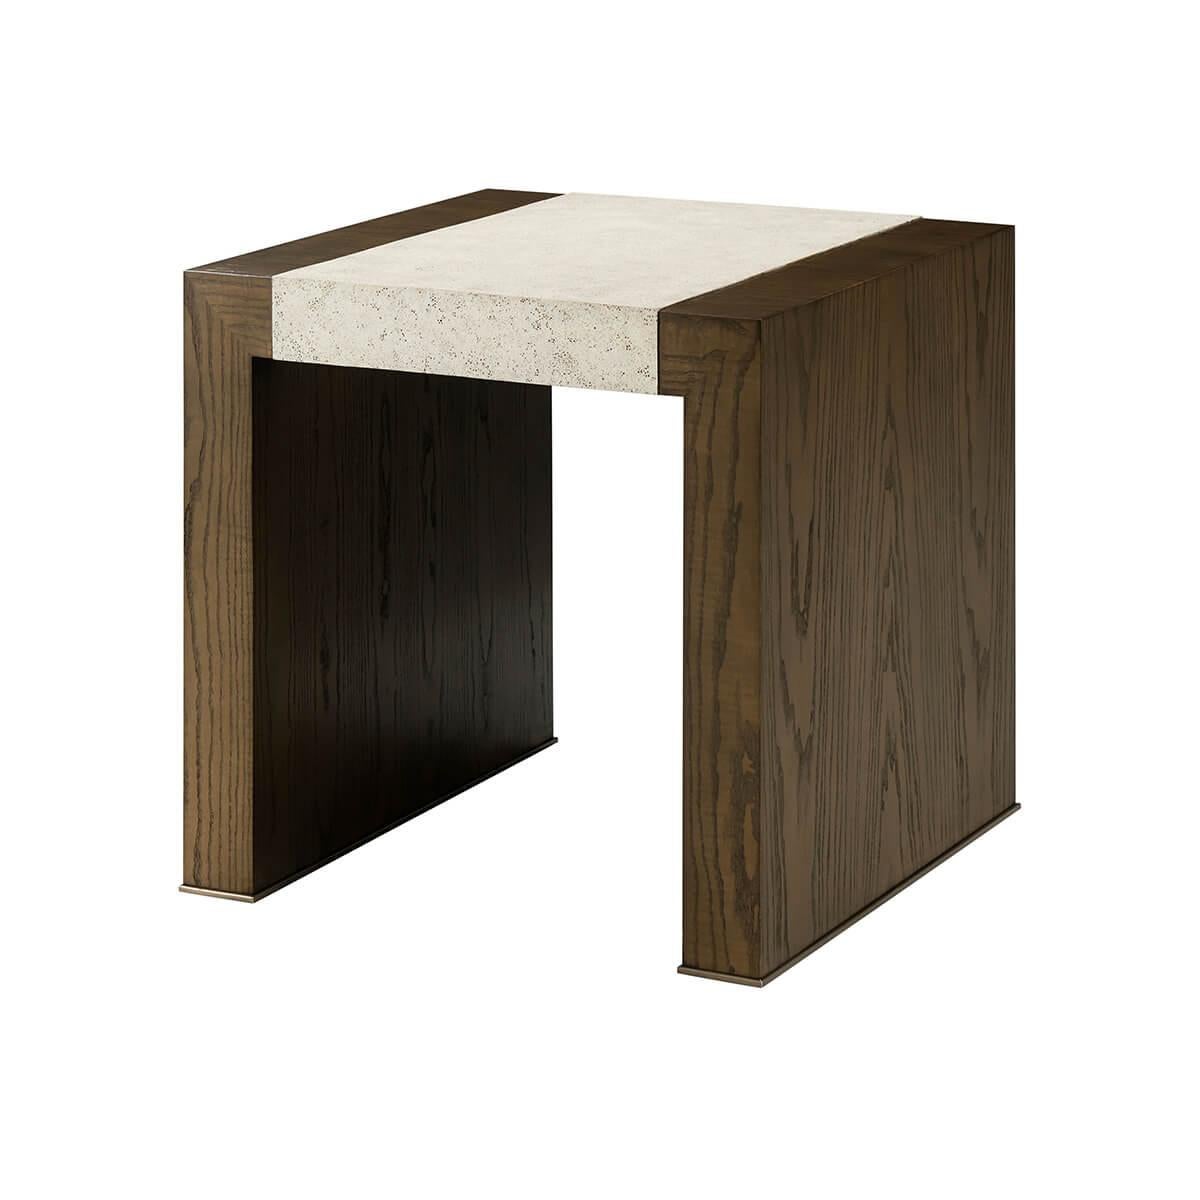 Modern side table made of figured cathedral ash in dark earth finish with our exclusive Mineral finish at the top and metal detail at the base of the legs in a bronze finish.
Dimensions: 24